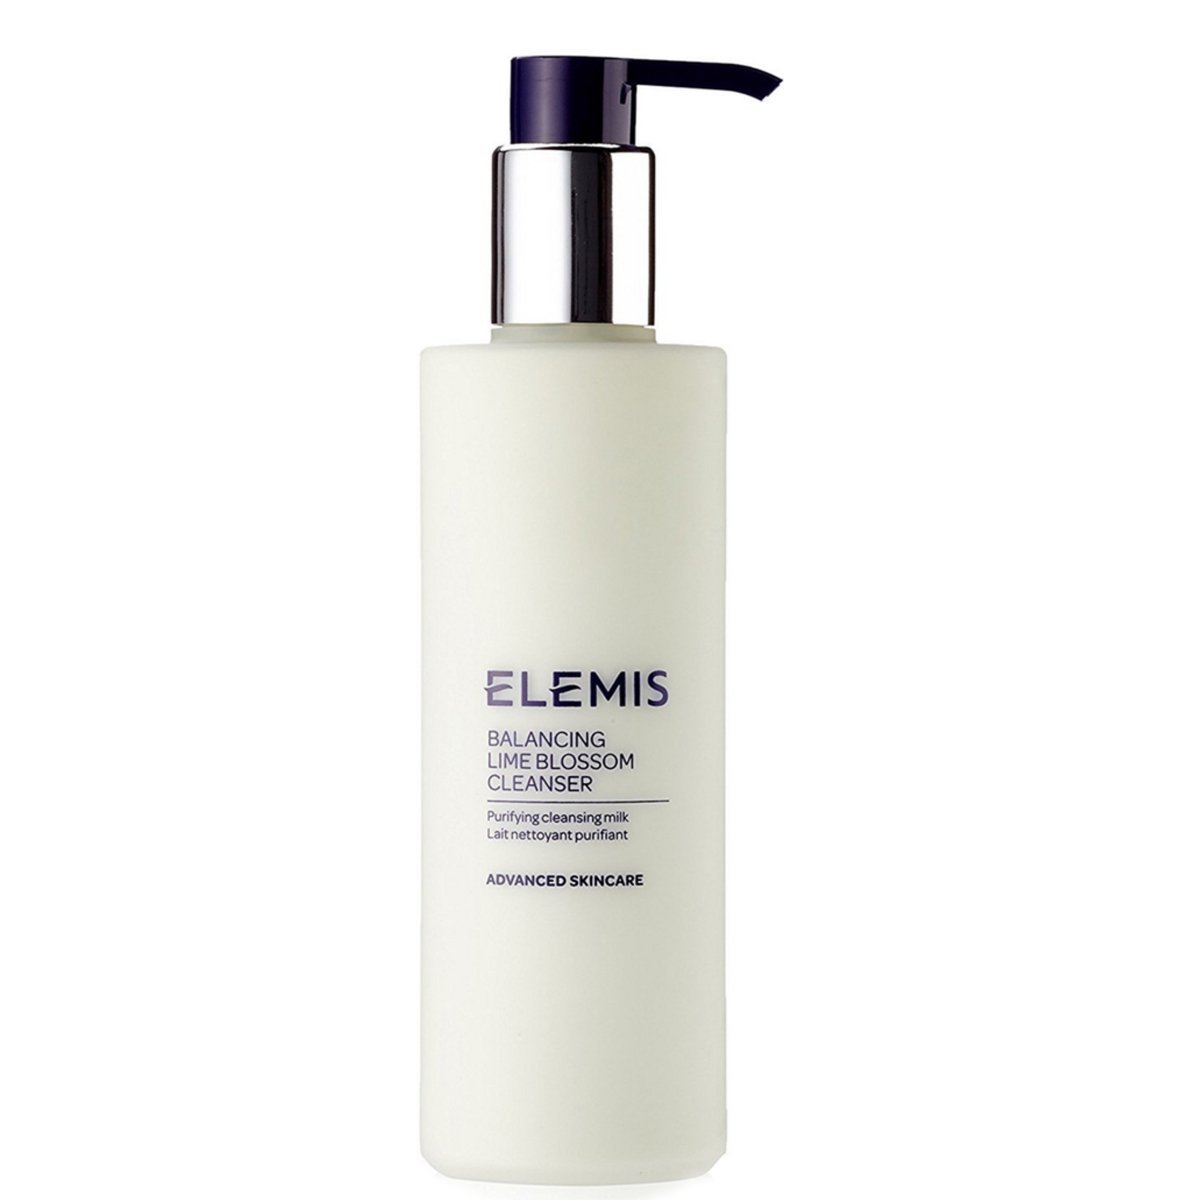 Smoothing cleanser. Rehydrating Rosepetal Cleanser 200ml. Elemis Rehydrating Rosepetal Cleanser. Elemis Deep Cleanse facial Wash. Elemis Deep Cleanse facial Wash косметика.